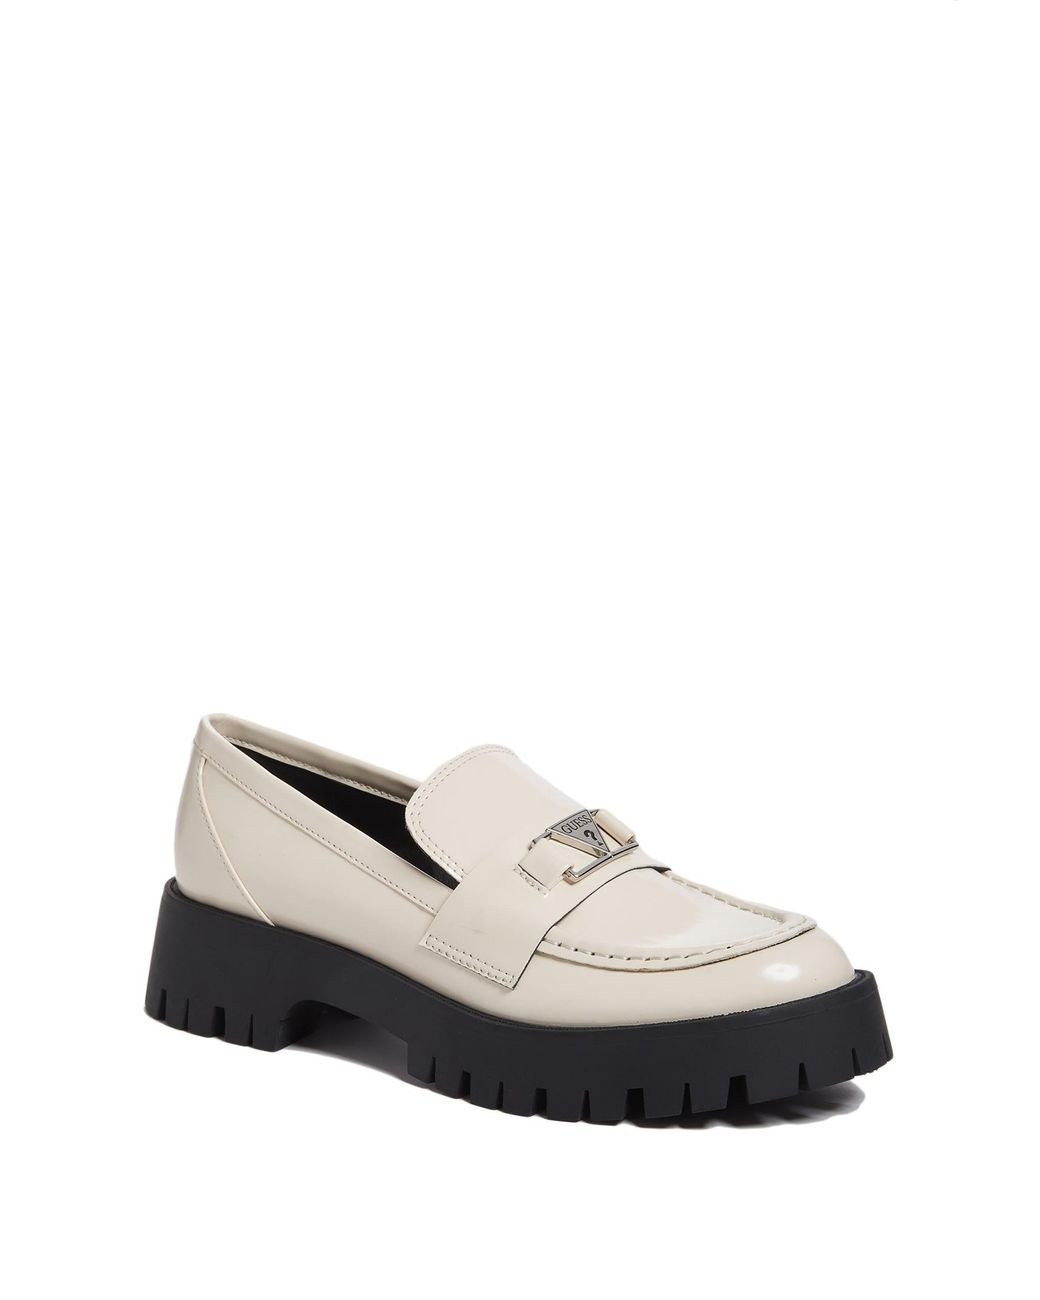 Guess Factory Chunky Platform Loafers in White | Lyst